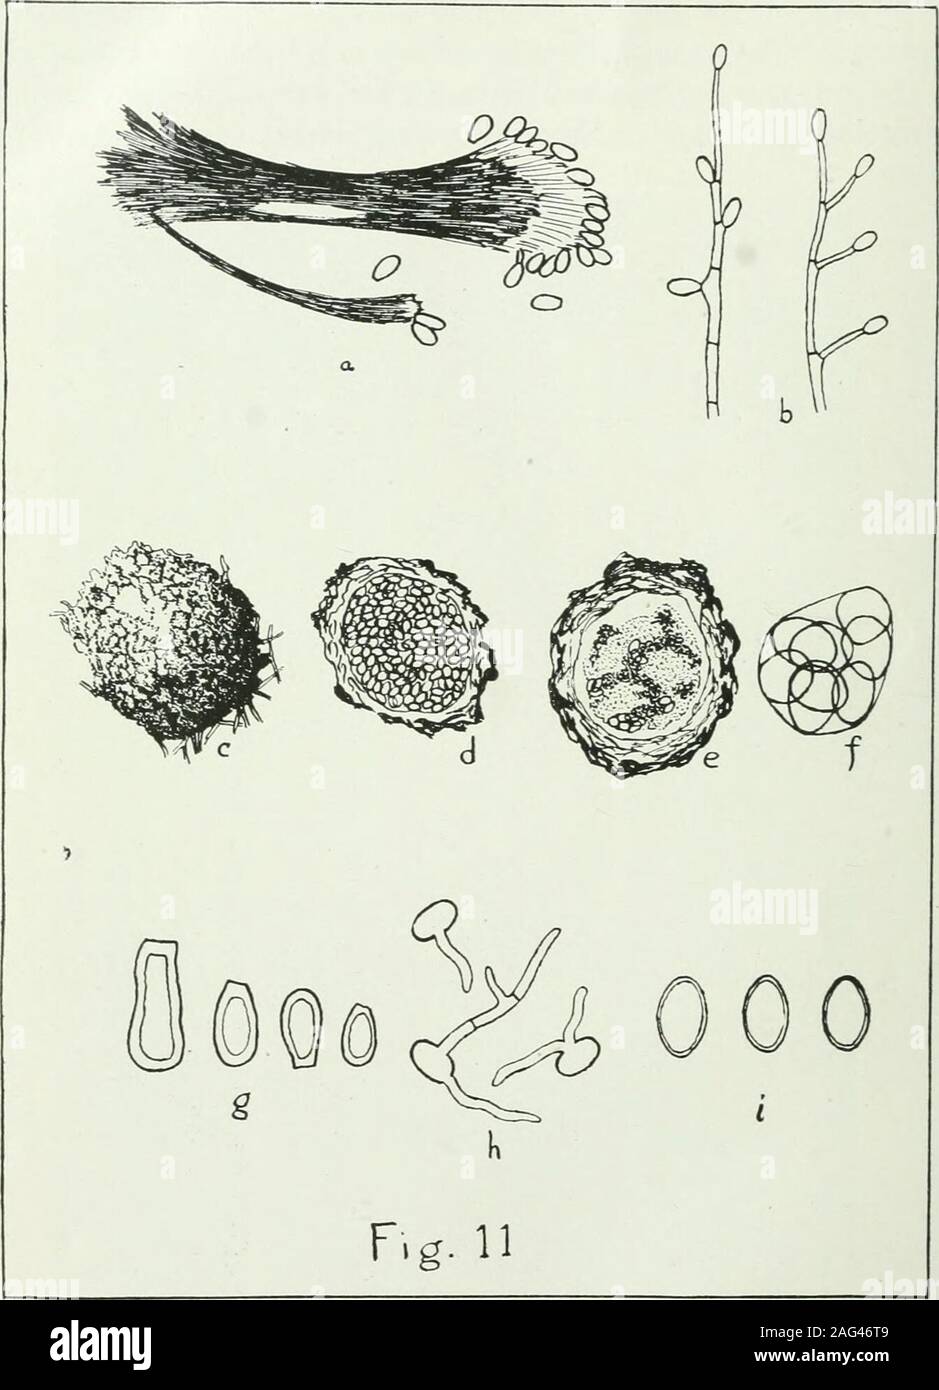 . The American journal of tropical medicine. Fifi. 10. Cultures of Allescheria Boydii From left to right (1) plain agar, (2) Sabourauds agar, (3) potato (4) beerwort. The dark sjiecks on the mycelium in cultures 2 and 3, and the whollydark character of the growth in (4) are the perithecia. 262 MARK F. BOYD AND EARL D. CRUTCHFIELD. Fig. 11. Morphology of Allescheria ix Culture a, Coremium; b, Conidia with conidiaspores; c, Exterior of perithecium;d, Section of a mature perithecium filled with spores; e, Section of an immatureperithecium, showing a few asci; f, A mature ascus with eight spores; Stock Photo